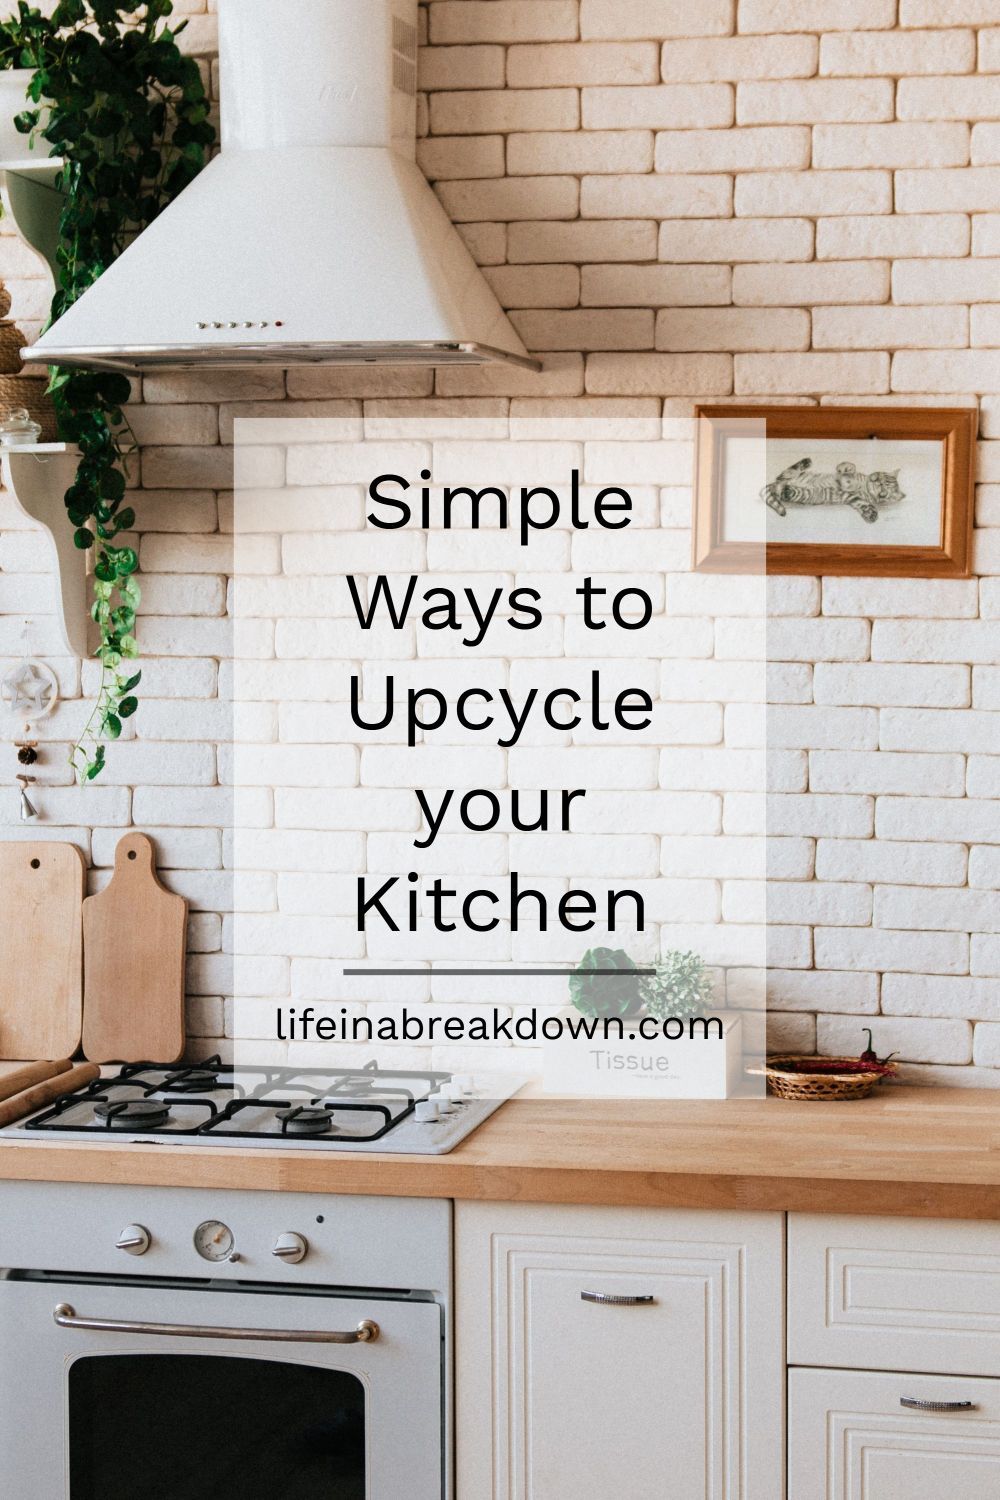 Simple Ways to Upcycle your Kitchen | Life in a Break Down -   10 home accessories Wood simple ideas